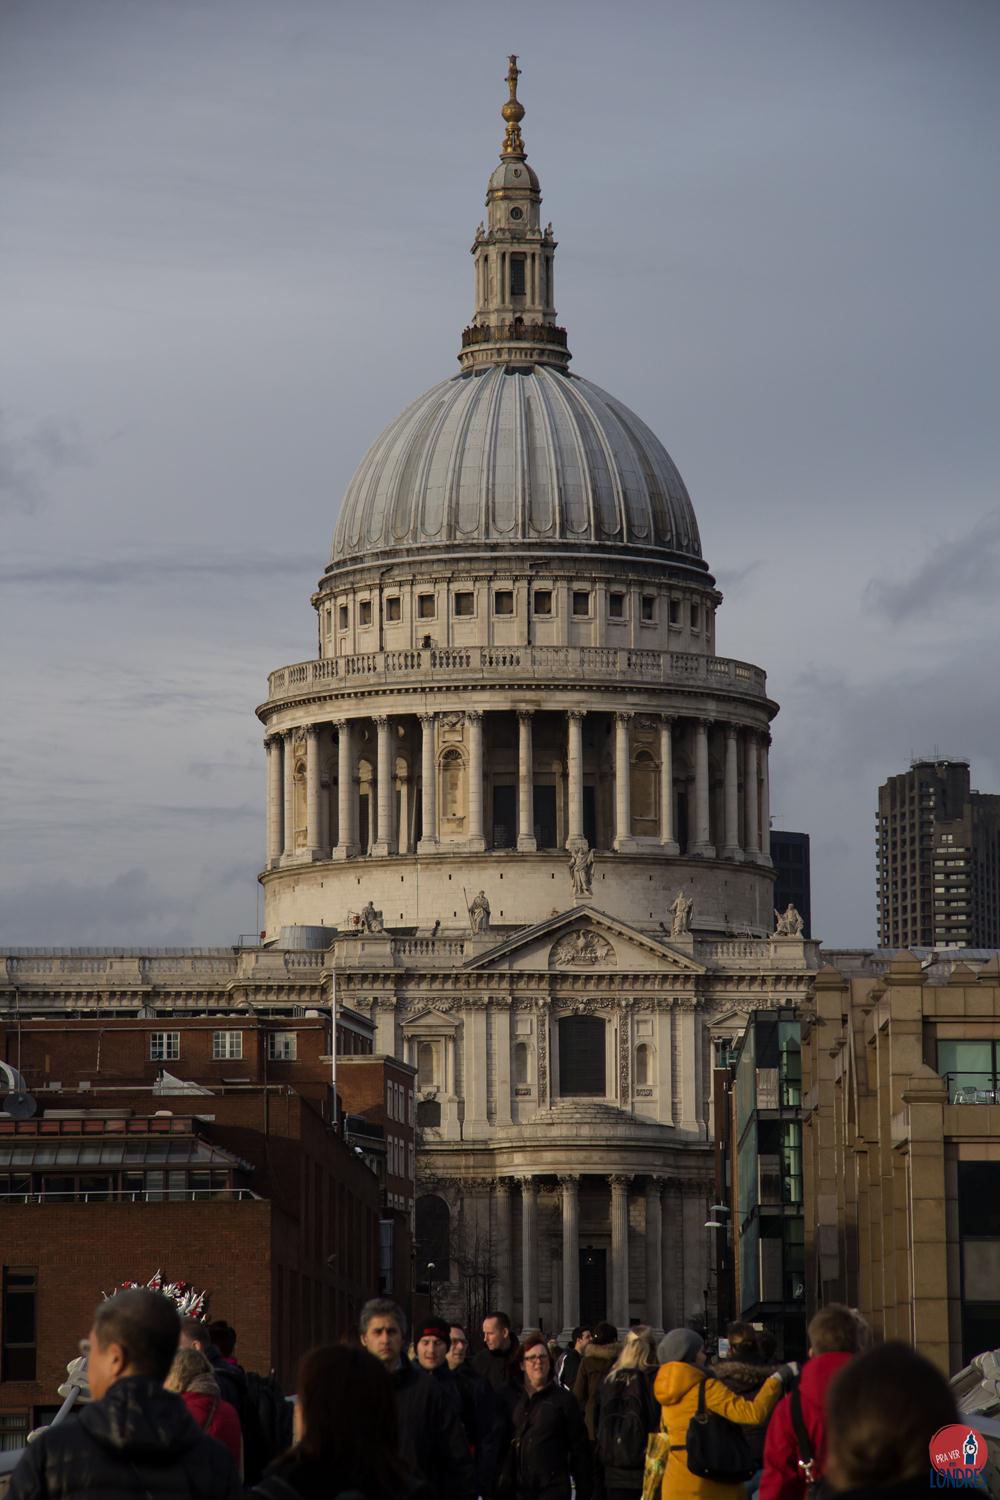 tate modern - museu em londres - st. paul's cathedral